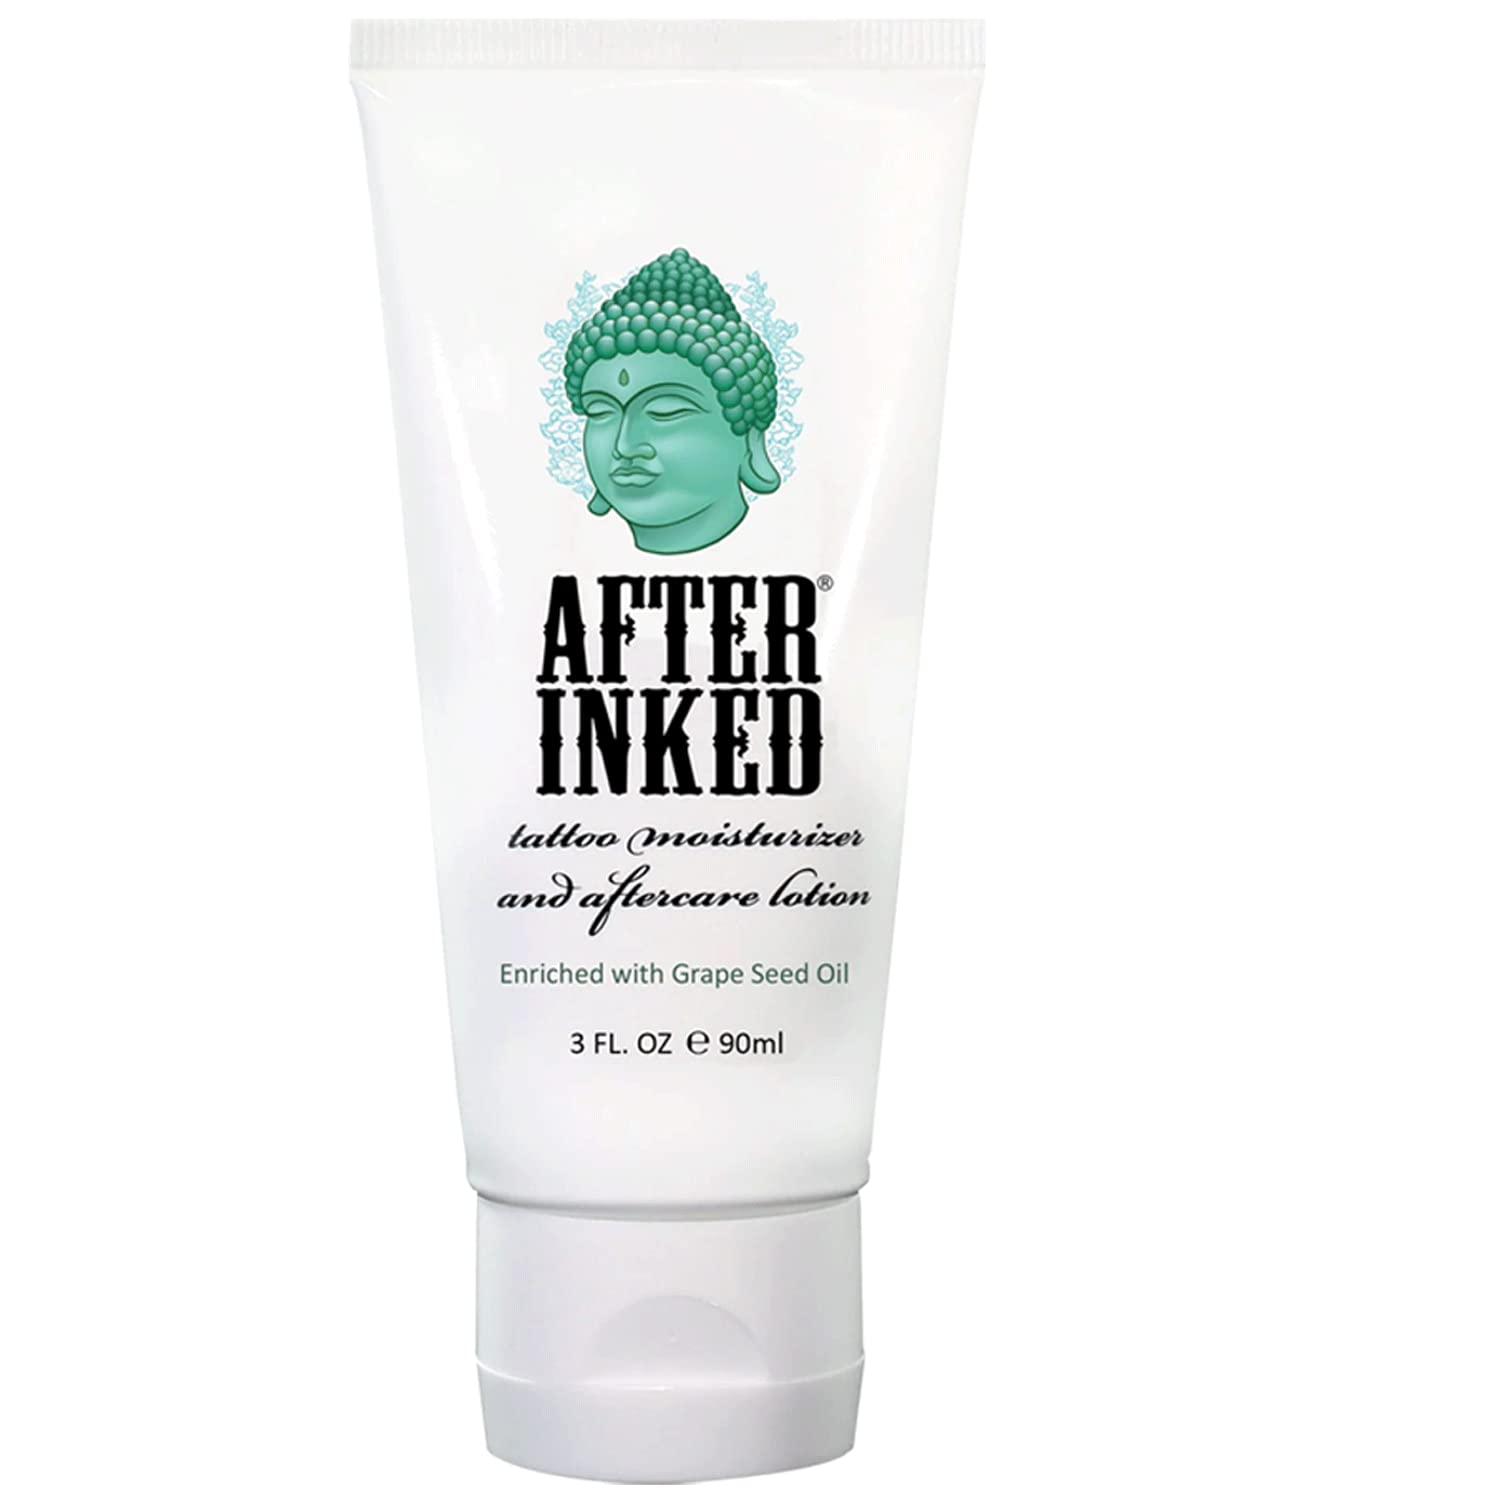 Mua After Inked Tattoo Moisturizer & Aftercare Lotion, Vegan Tattoo  Aftercare Cream Enriched with Grape Seed Oil, Tattoo Balm, Tattoo Kit  Essentials - 3 Fluid Ounce Tube (1-Pack) trên Amazon Mỹ chính